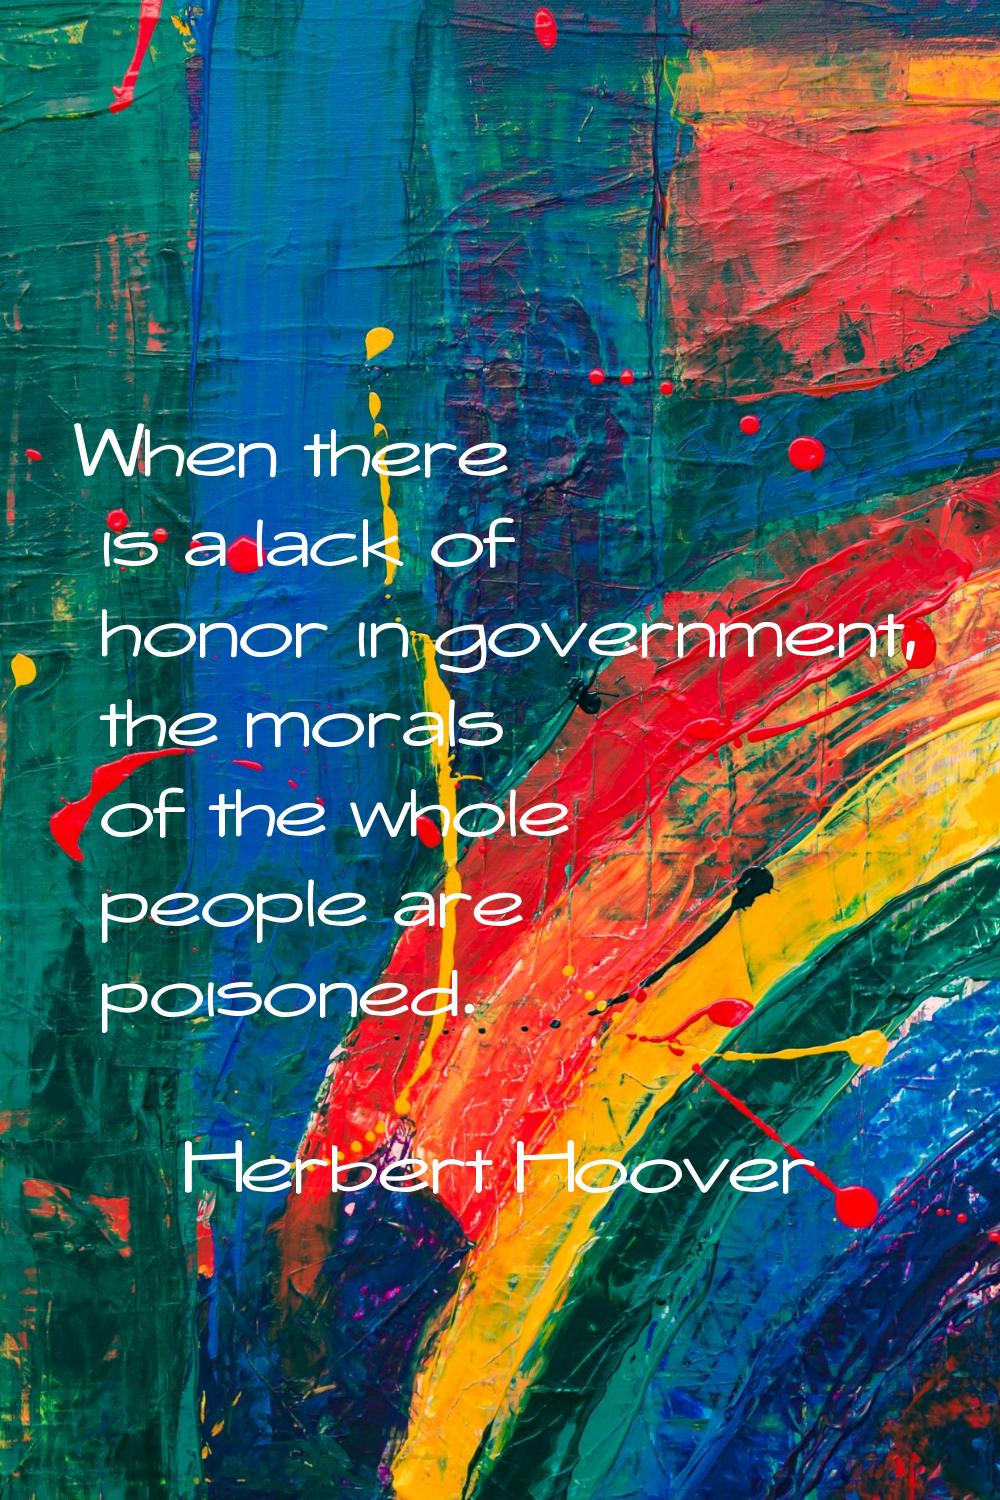 When there is a lack of honor in government, the morals of the whole people are poisoned.